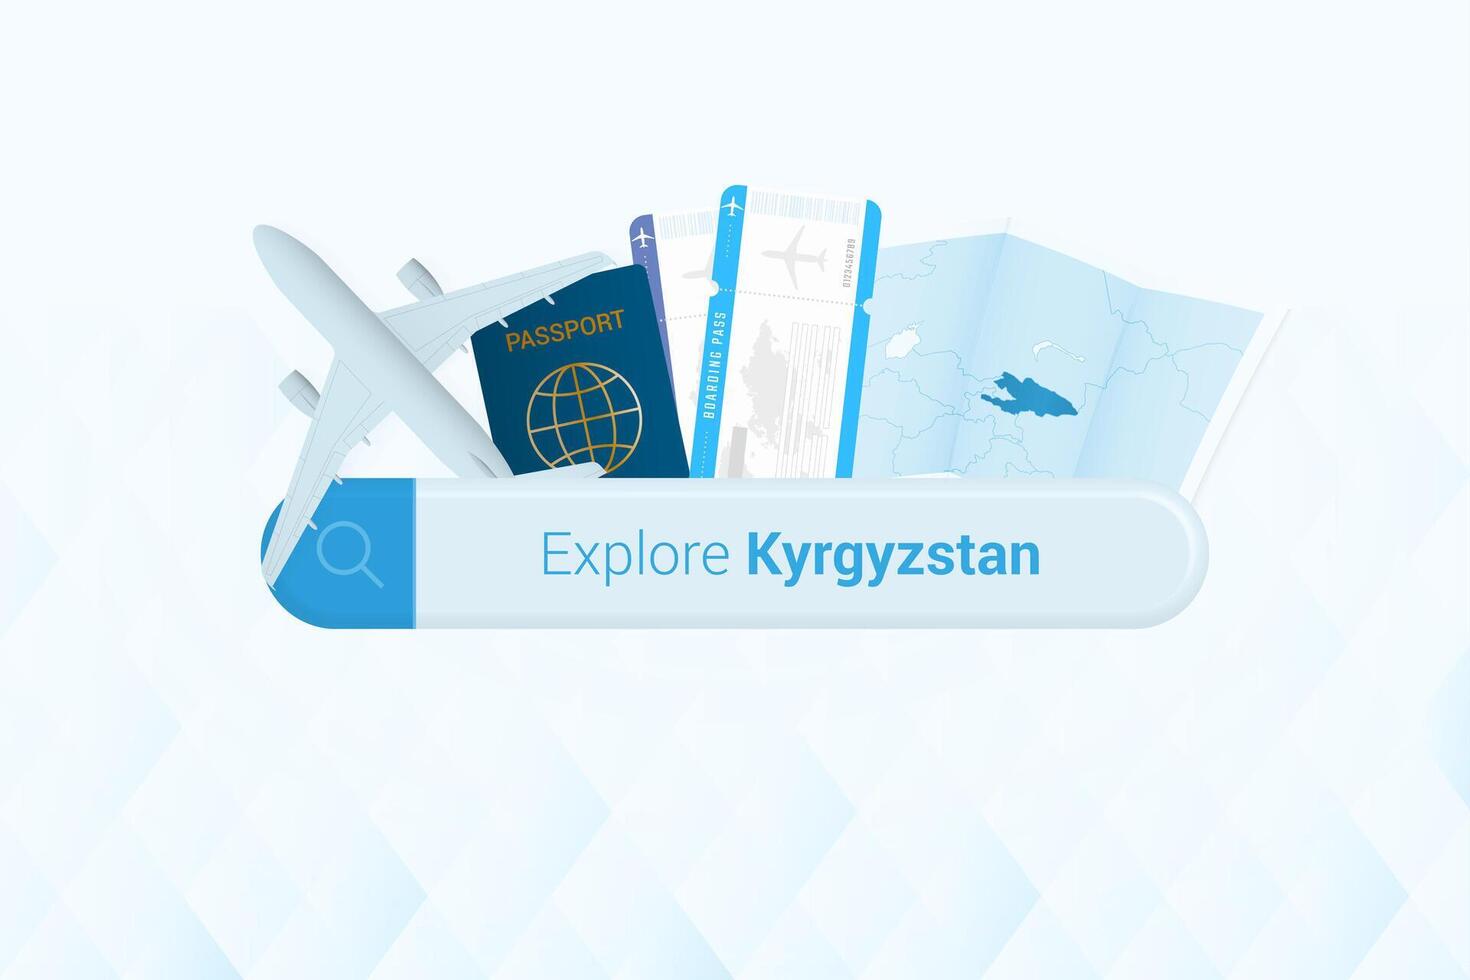 Searching tickets to Kyrgyzstan or travel destination in Kyrgyzstan. Searching bar with airplane, passport, boarding pass, tickets and map. vector